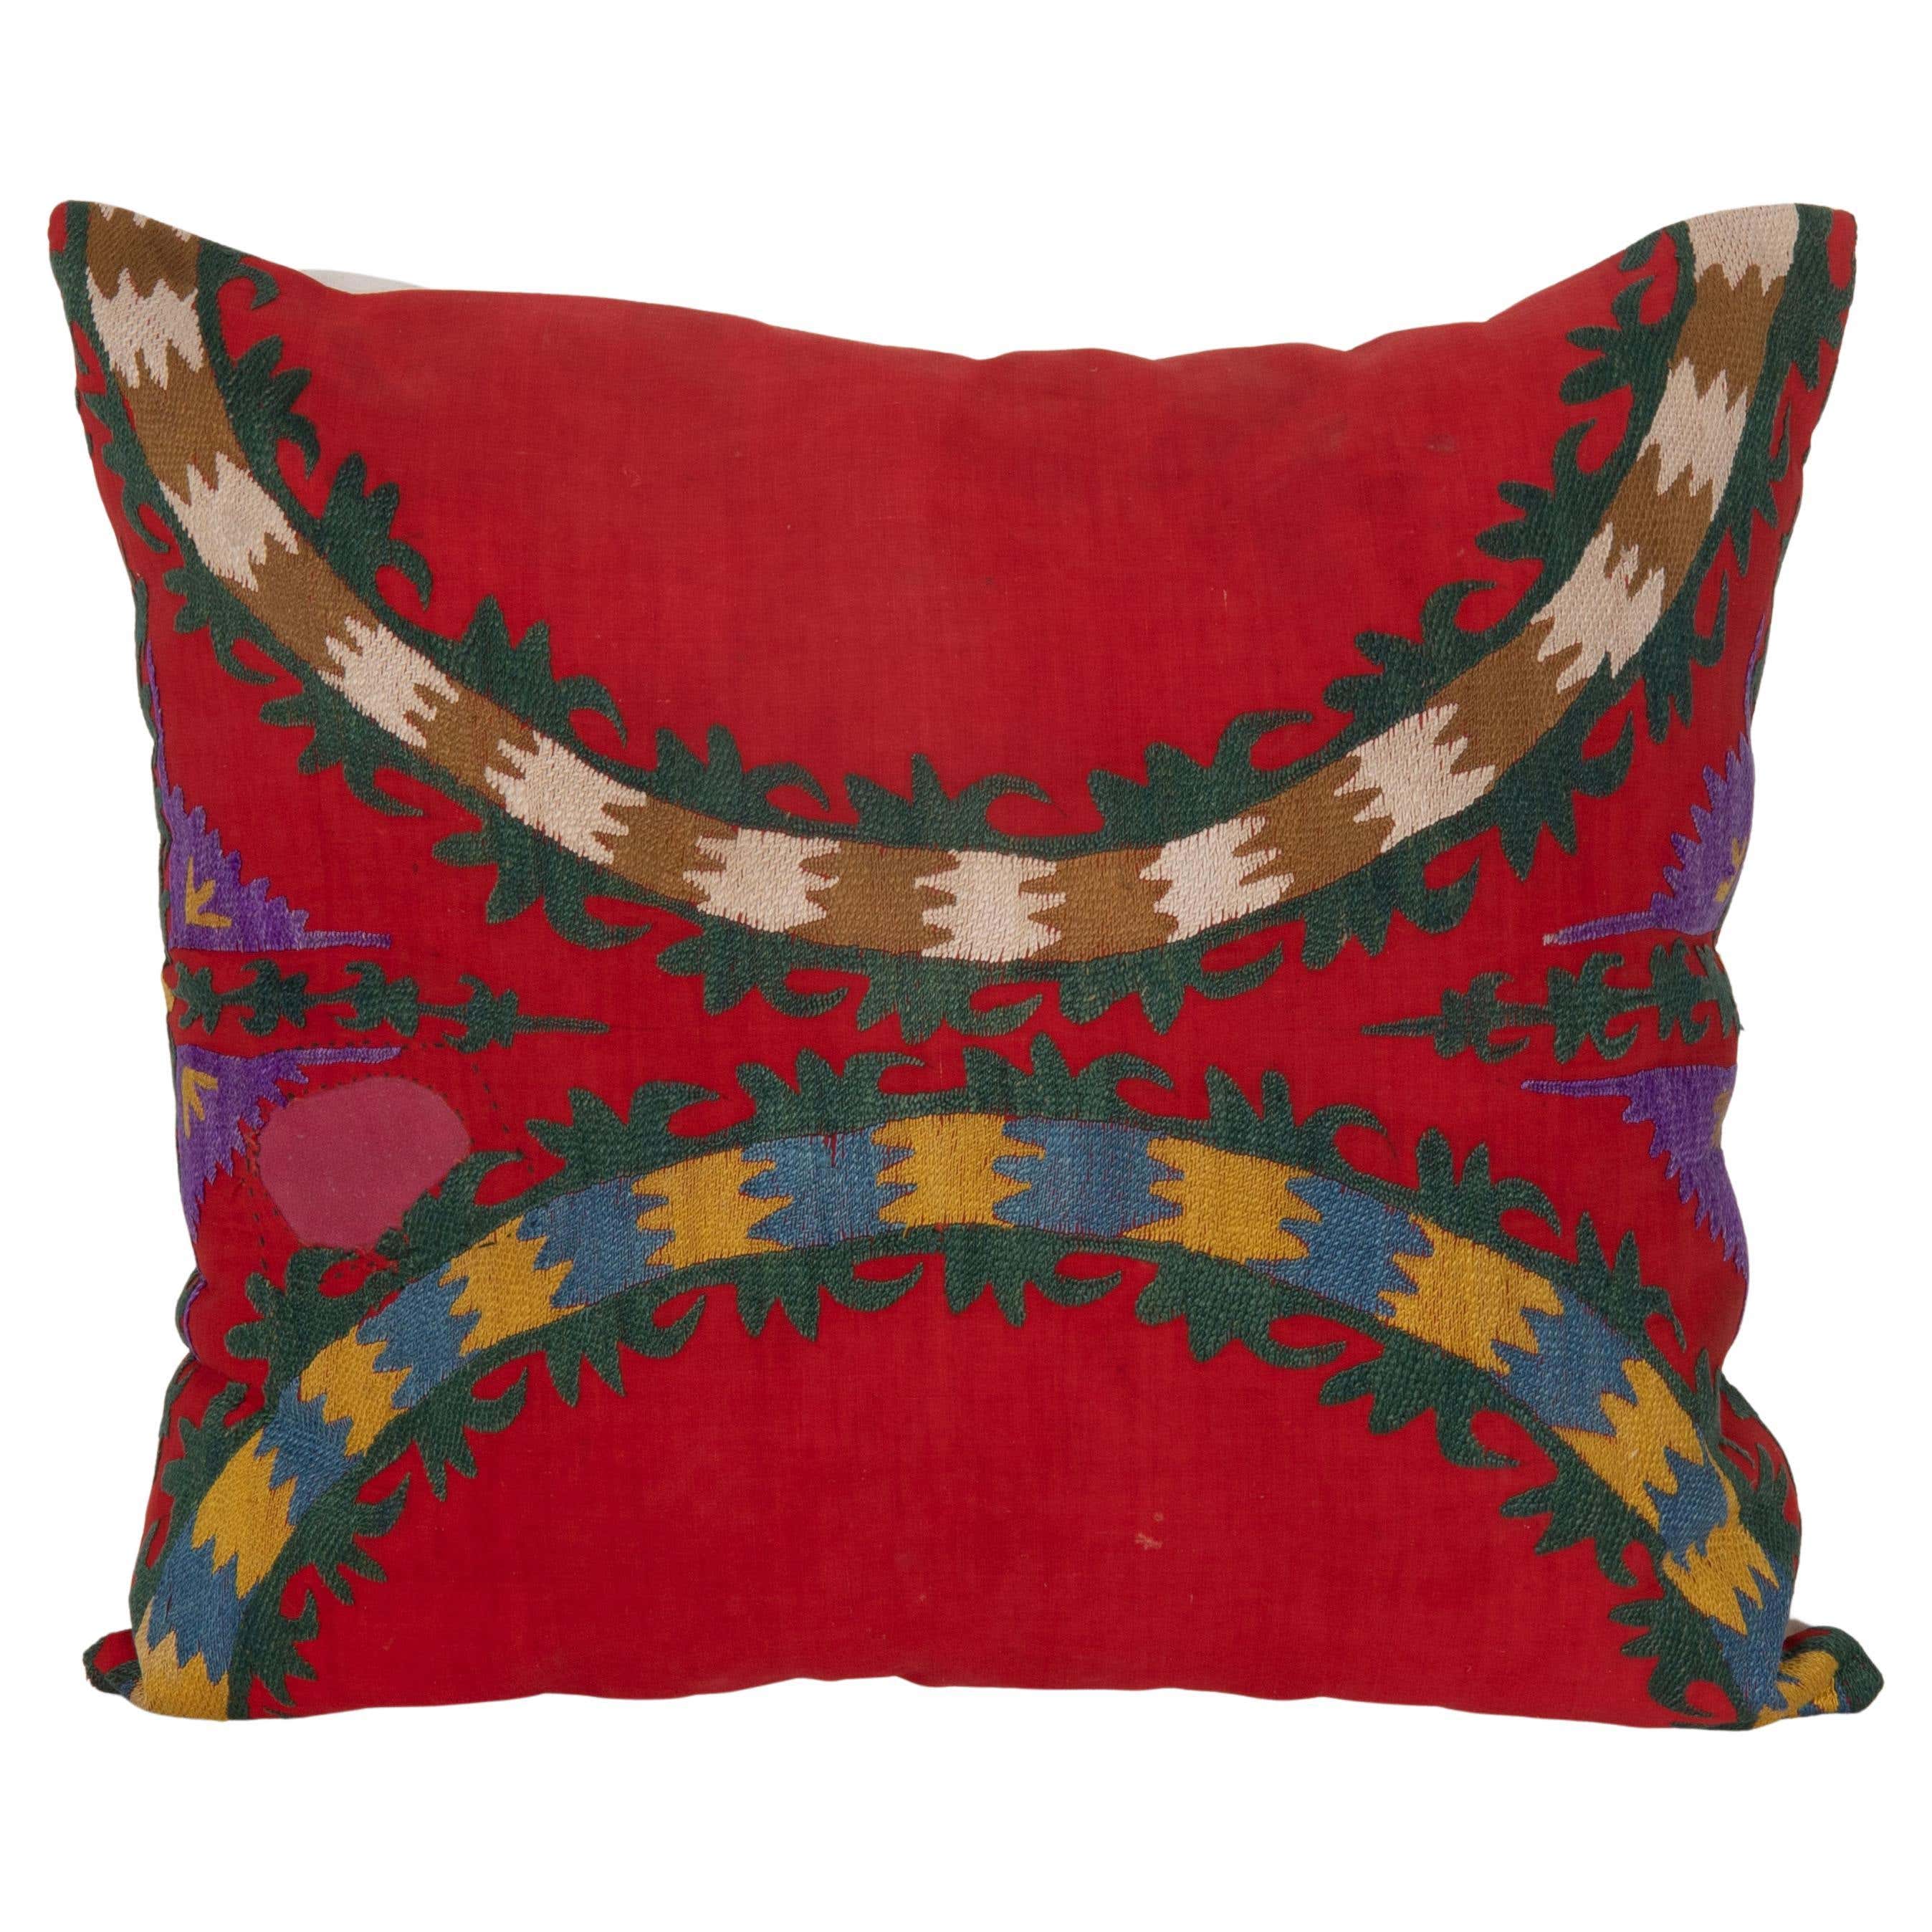 https://a.1stdibscdn.com/pillow-case-made-from-an-early-20th-c-uzbek-suzani-for-sale/f_18273/f_373295721701353508848/f_37329572_1701353510292_bg_processed.jpg?disable=upscale&auto=webp&quality=60&width=200%20200w